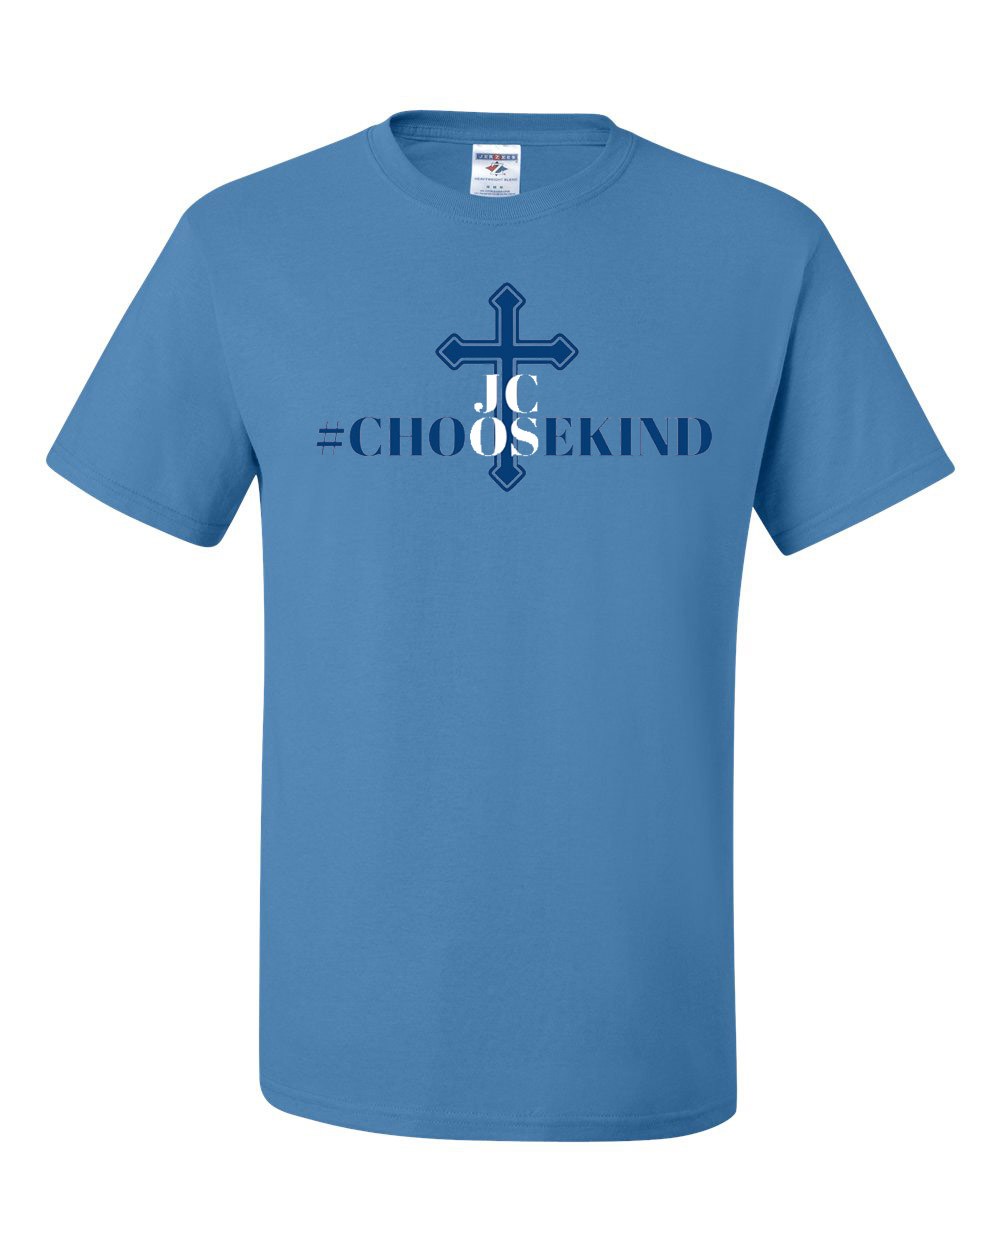 JCOS Staff S/S T-Shirt w/ Choose Kindness Logo #F12-F13 - Please Allow 2-3 Weeks for Delivery